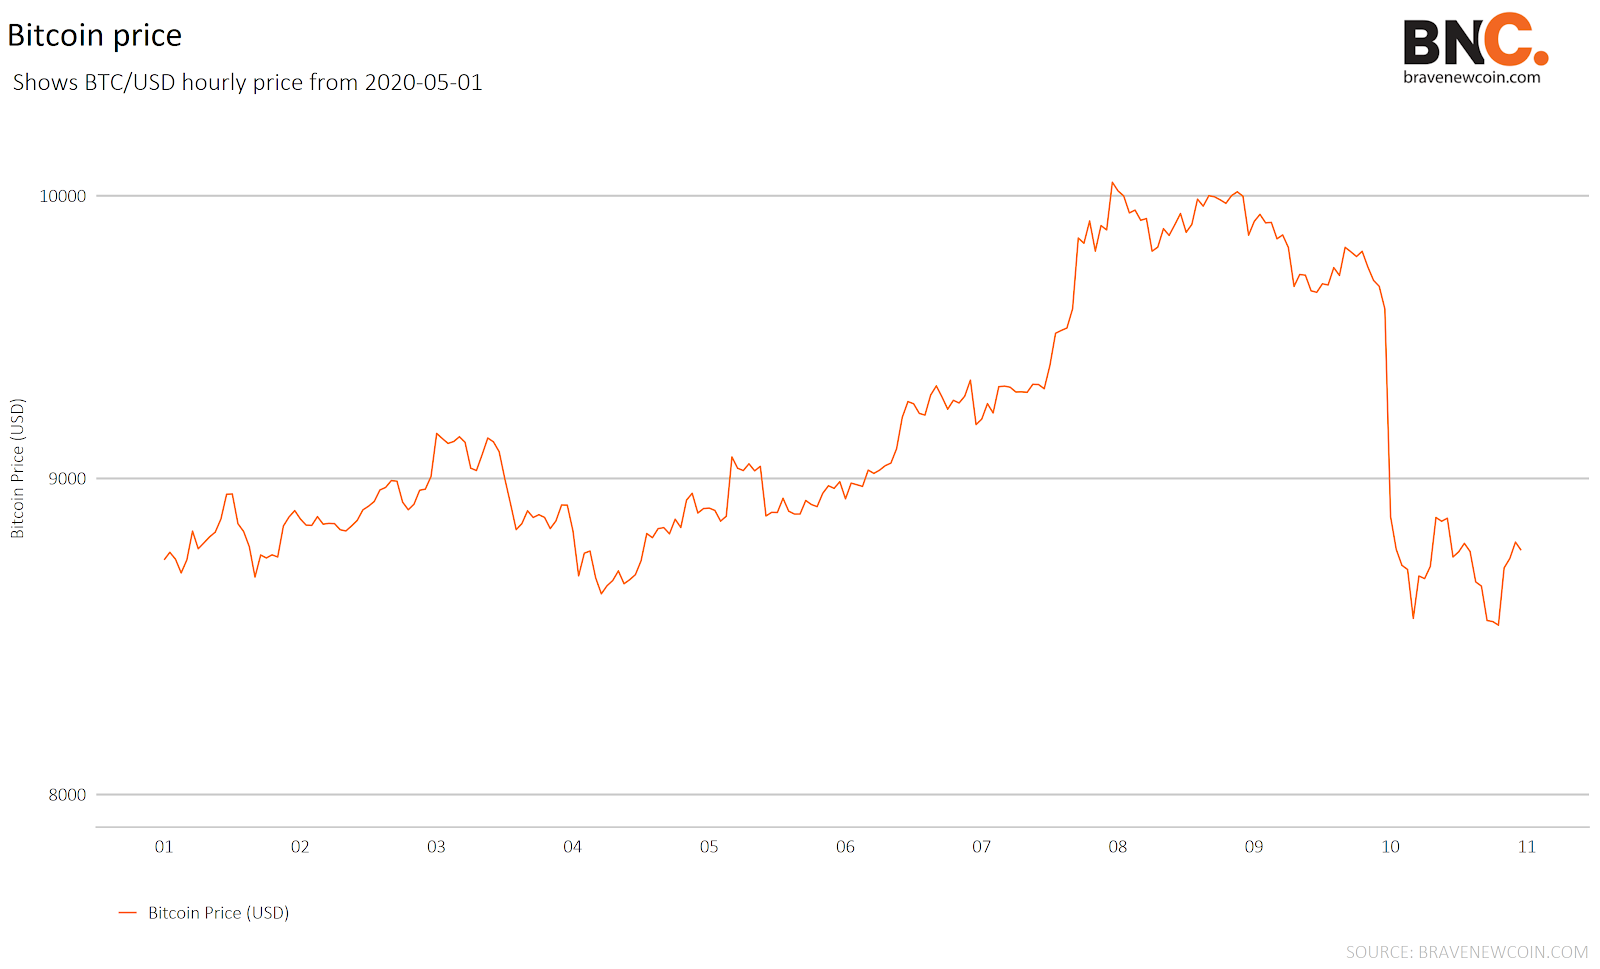 Data Snippet - Bitcoin price crash before the halving (1)